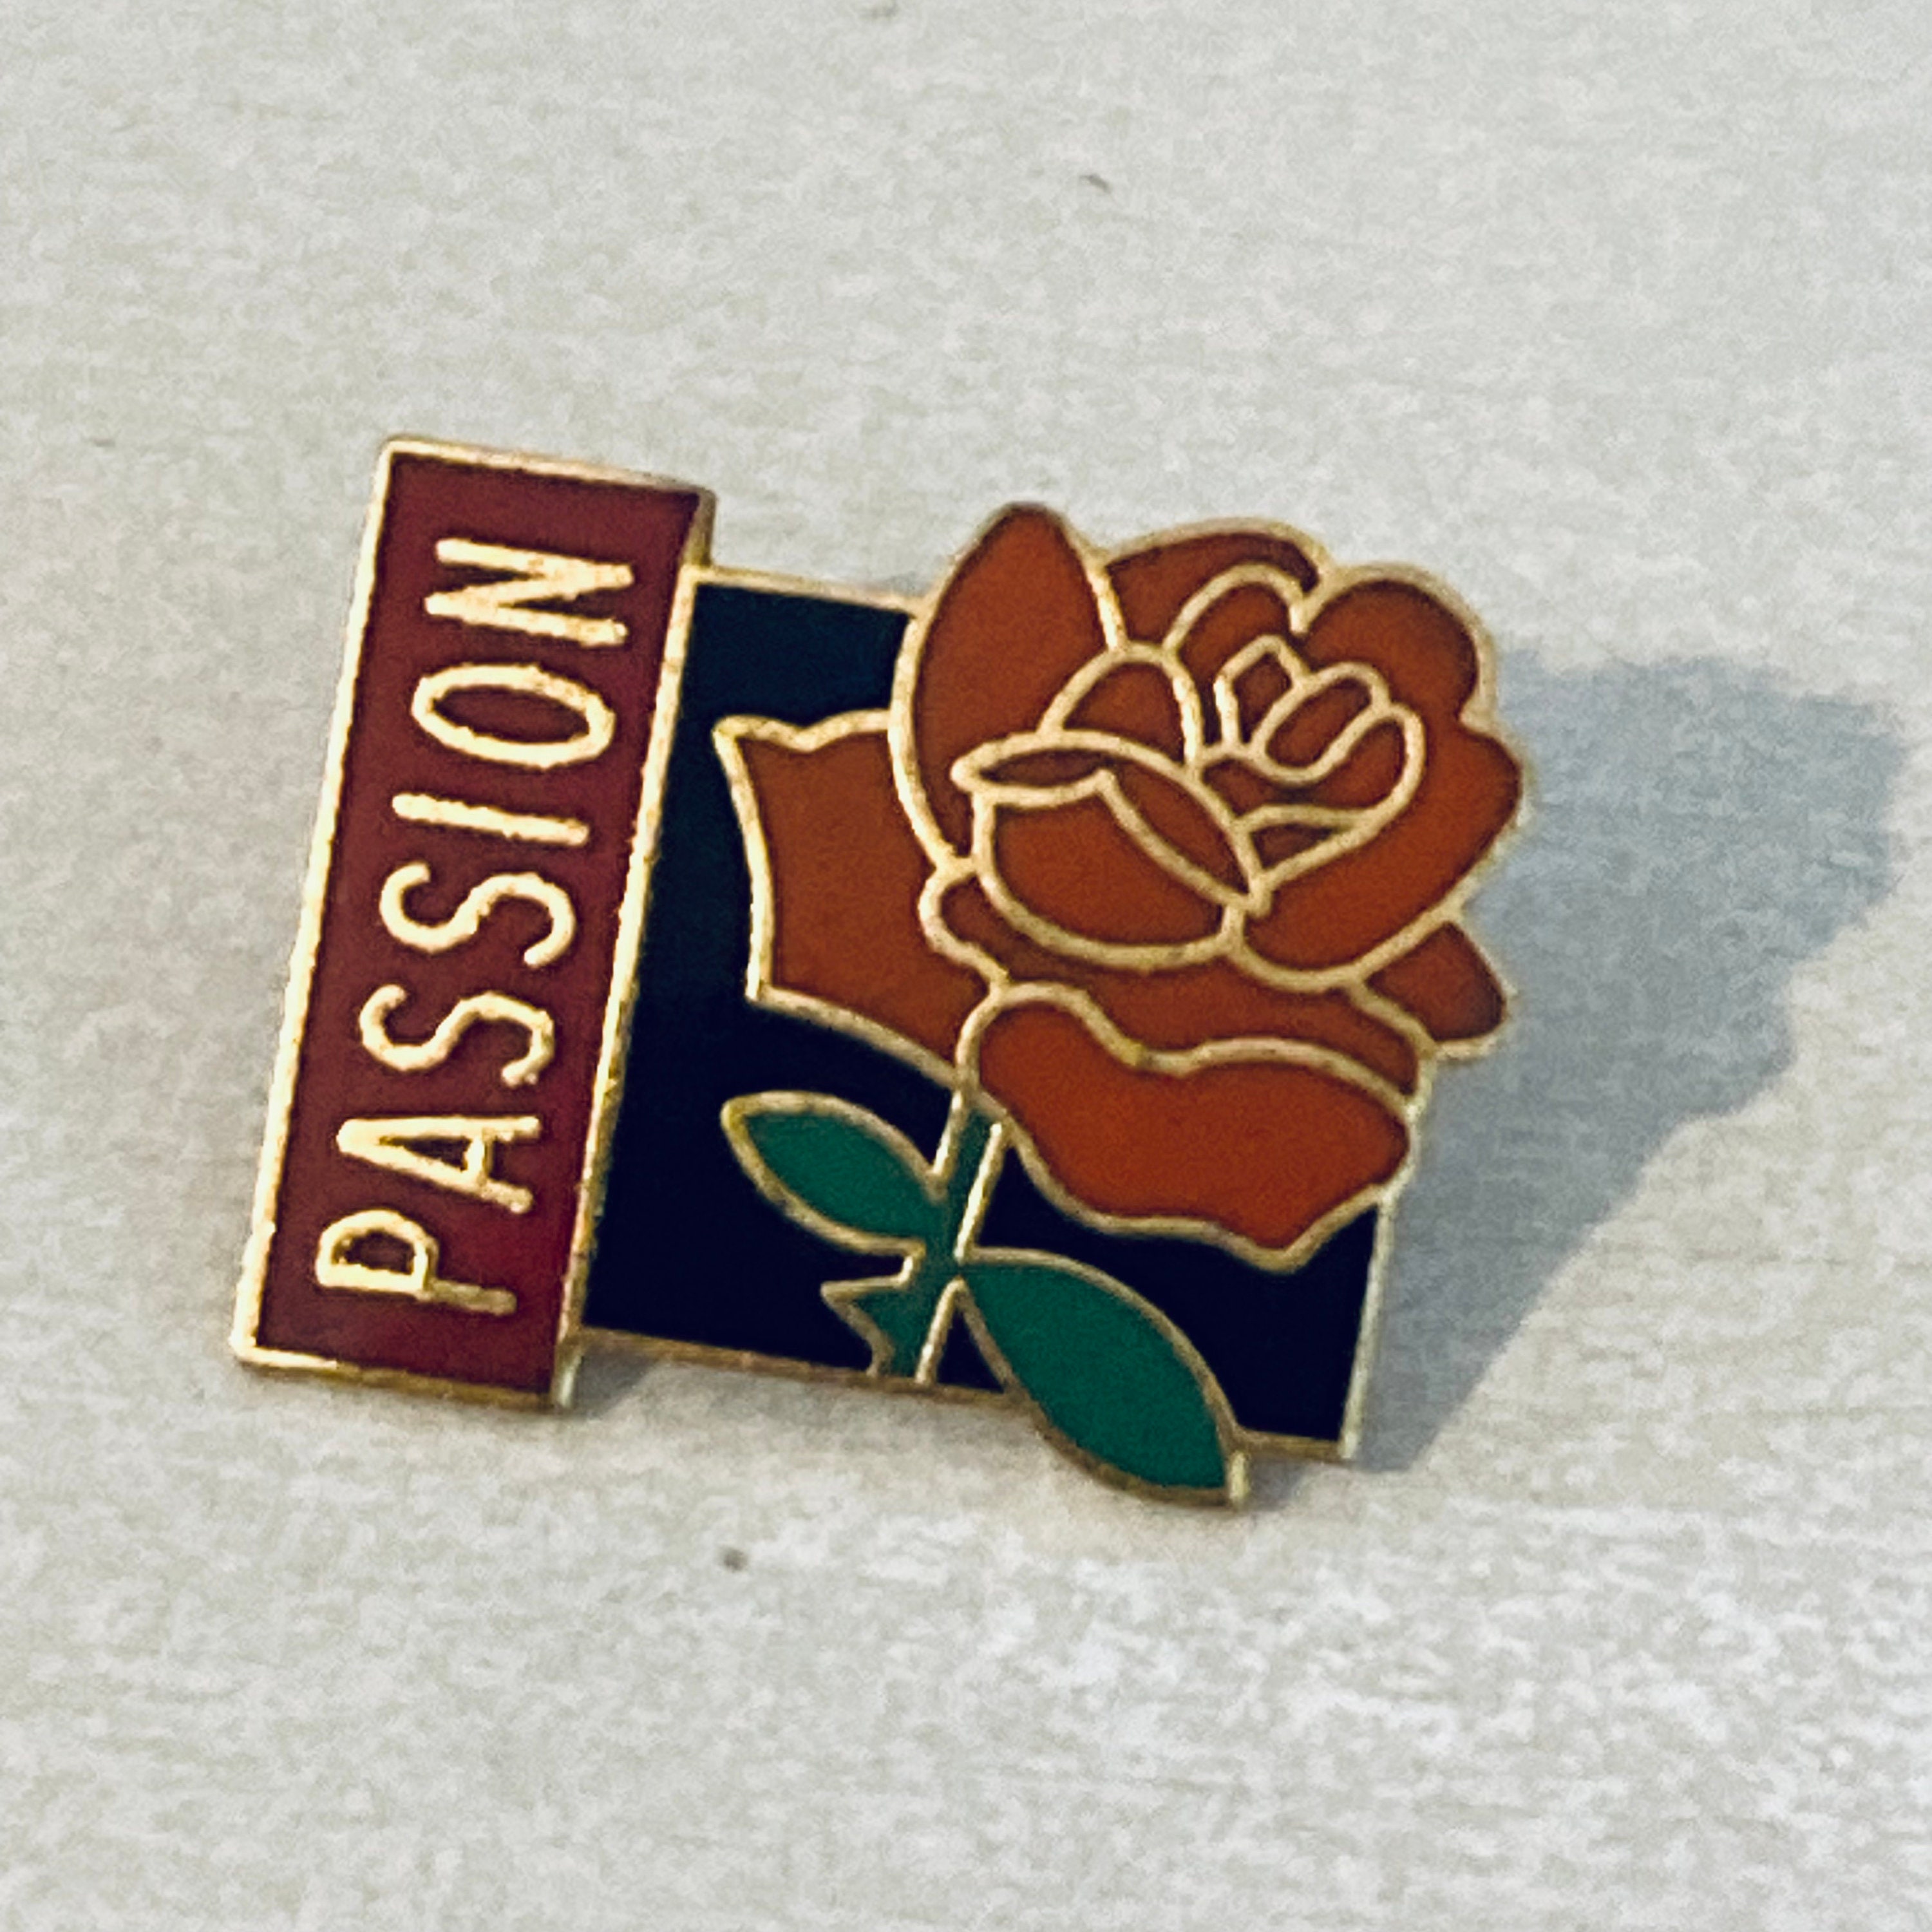 Pin on Pastel Passion